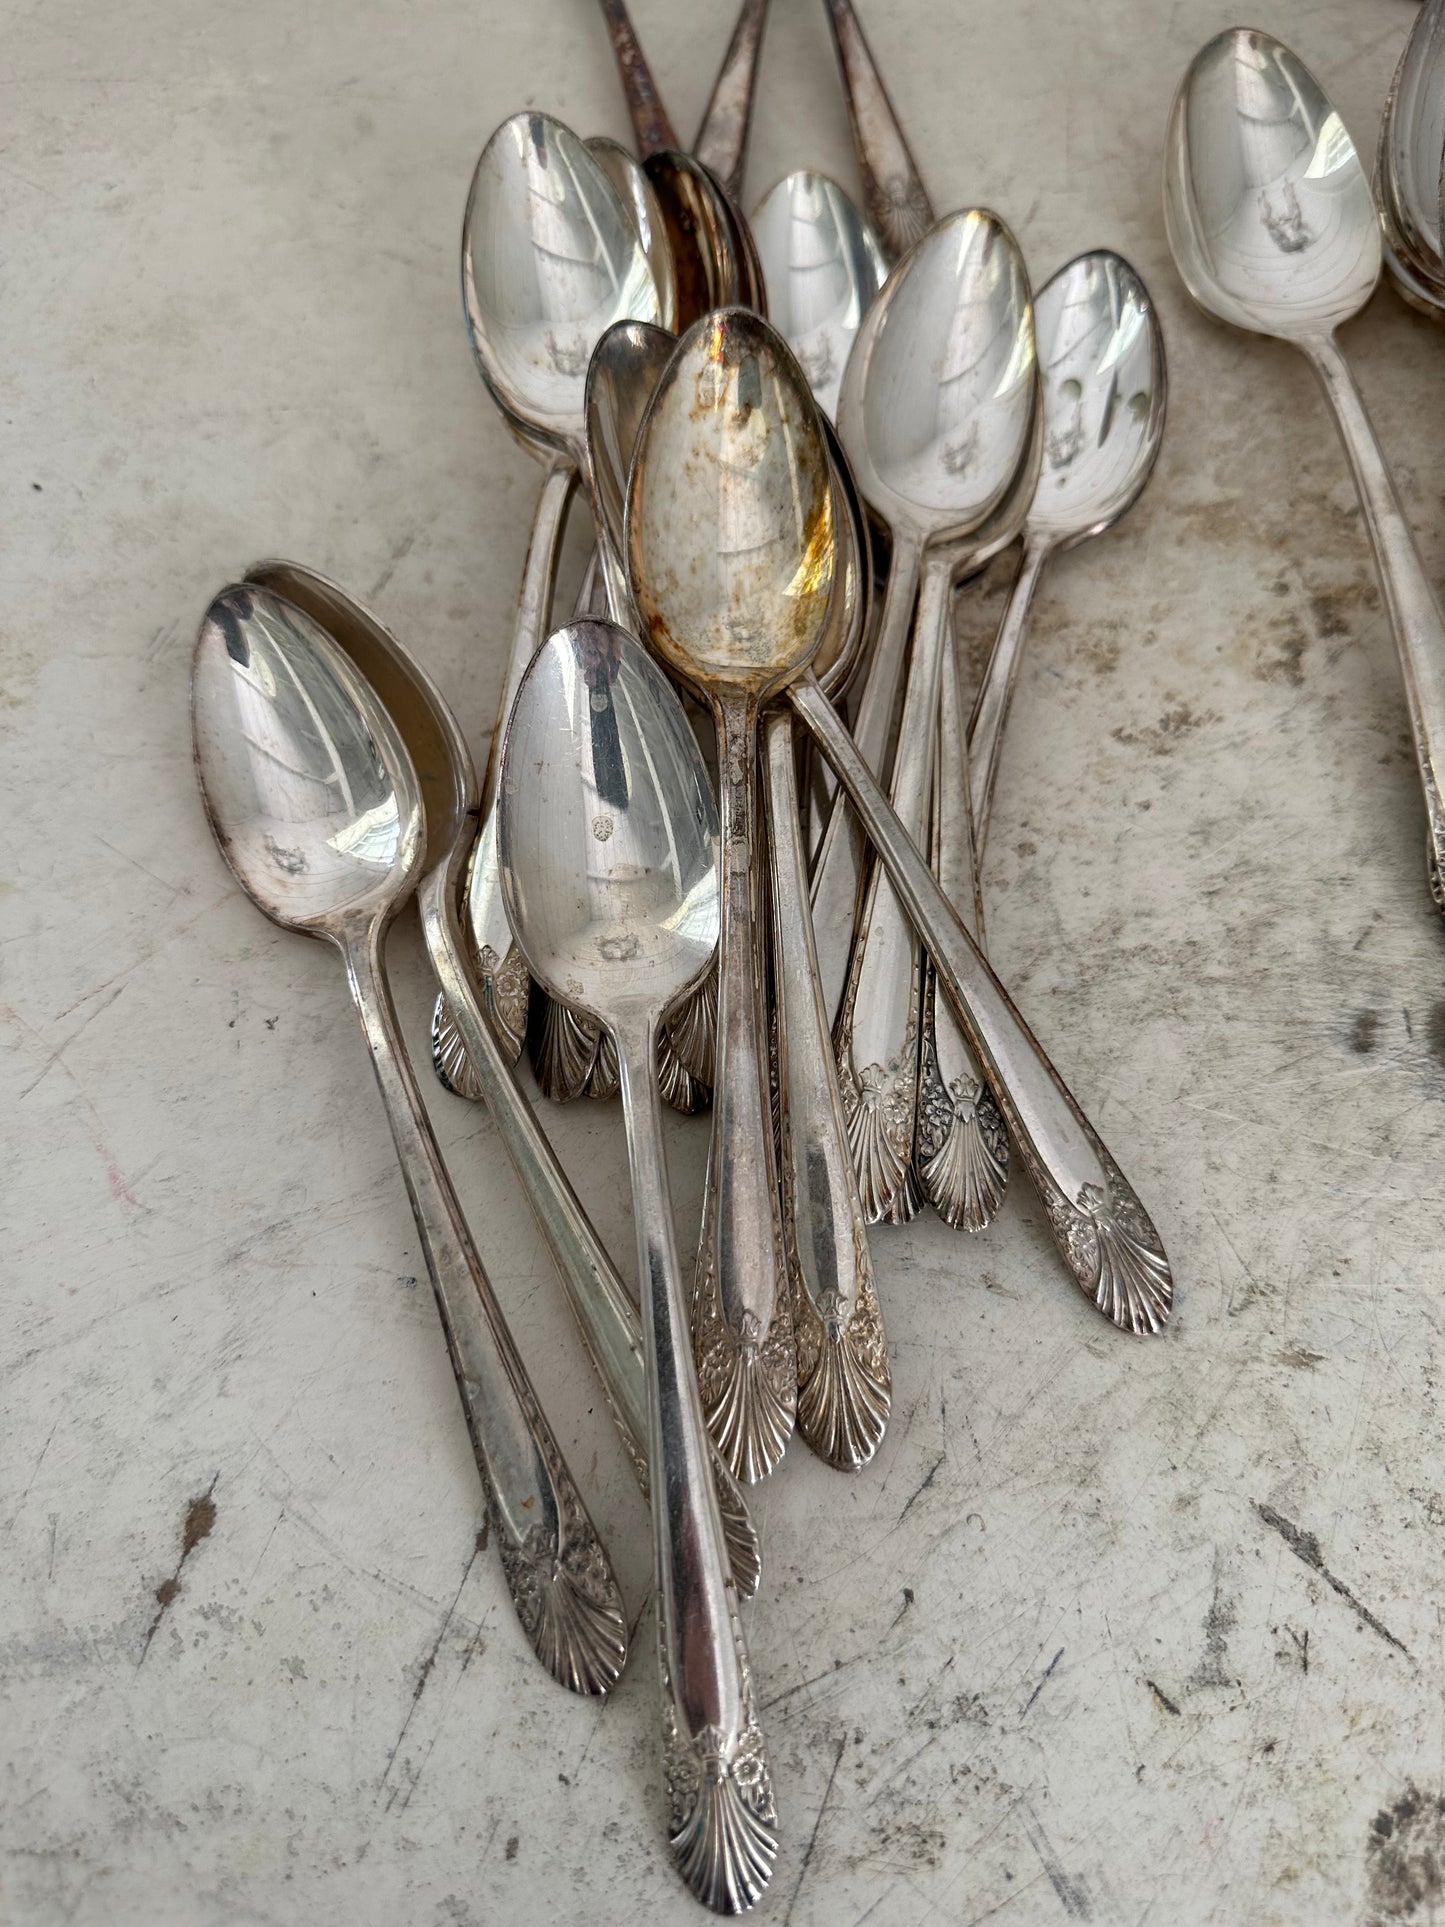 Vintage Tarnished Silverware - sold individually